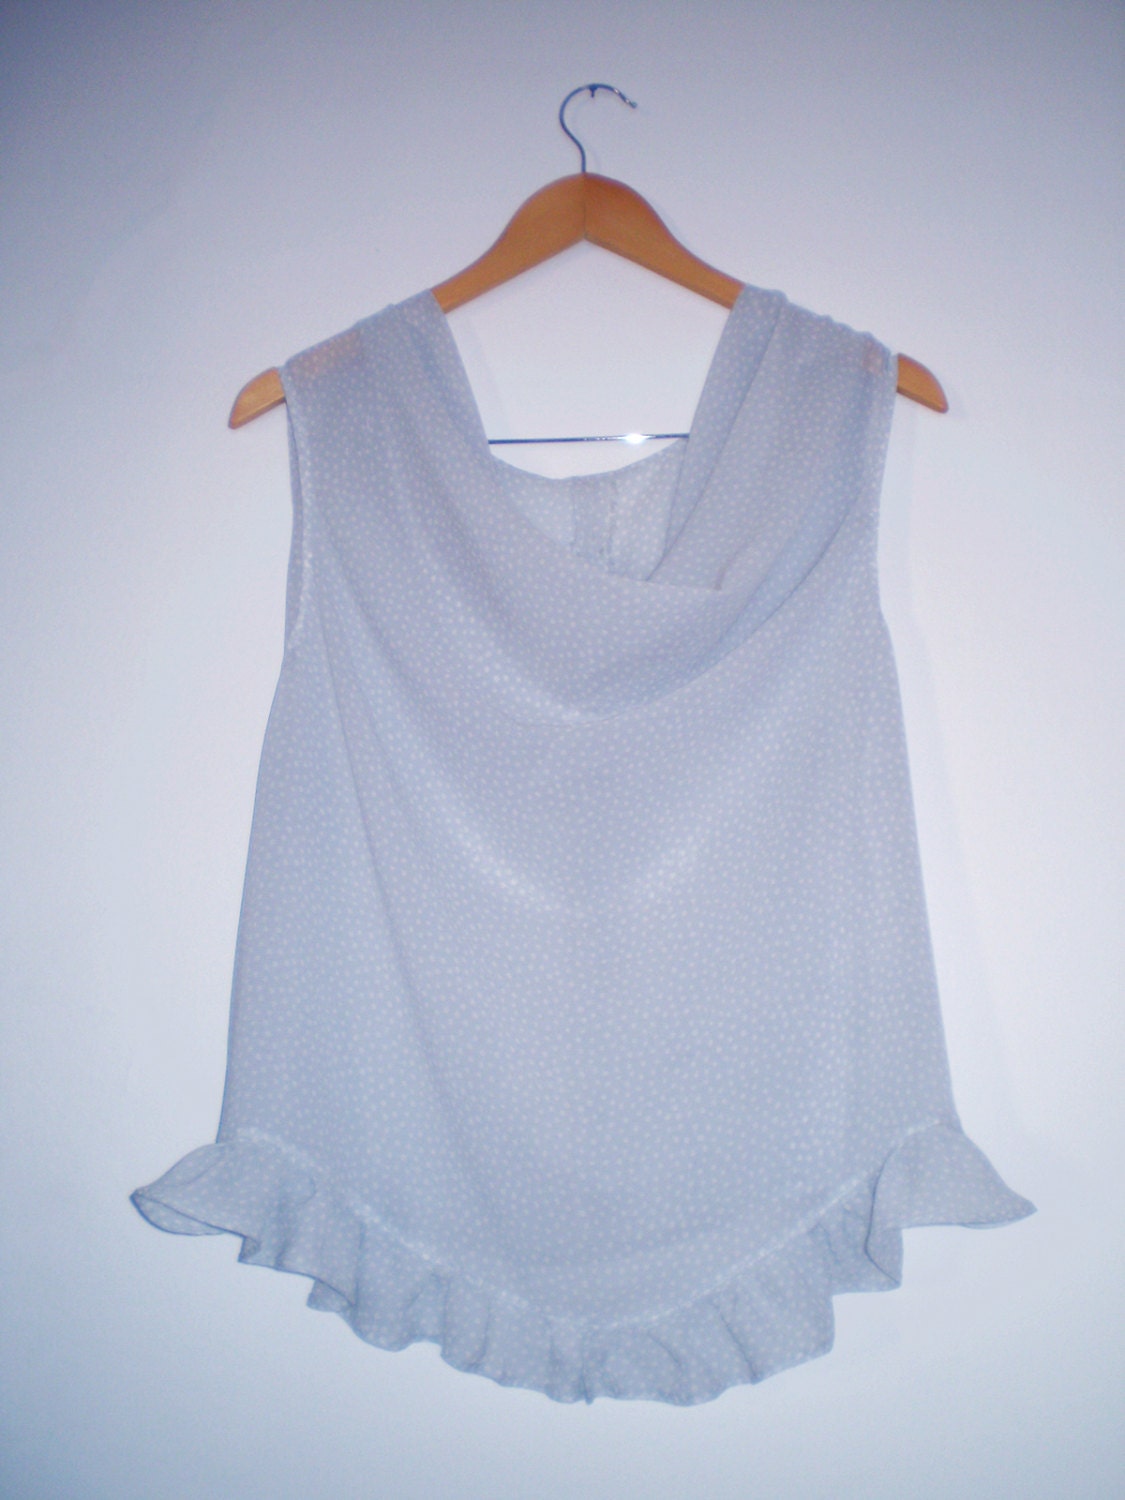 Georgette Blouse Pale blue dotted with cowl neckline by FedRaDD